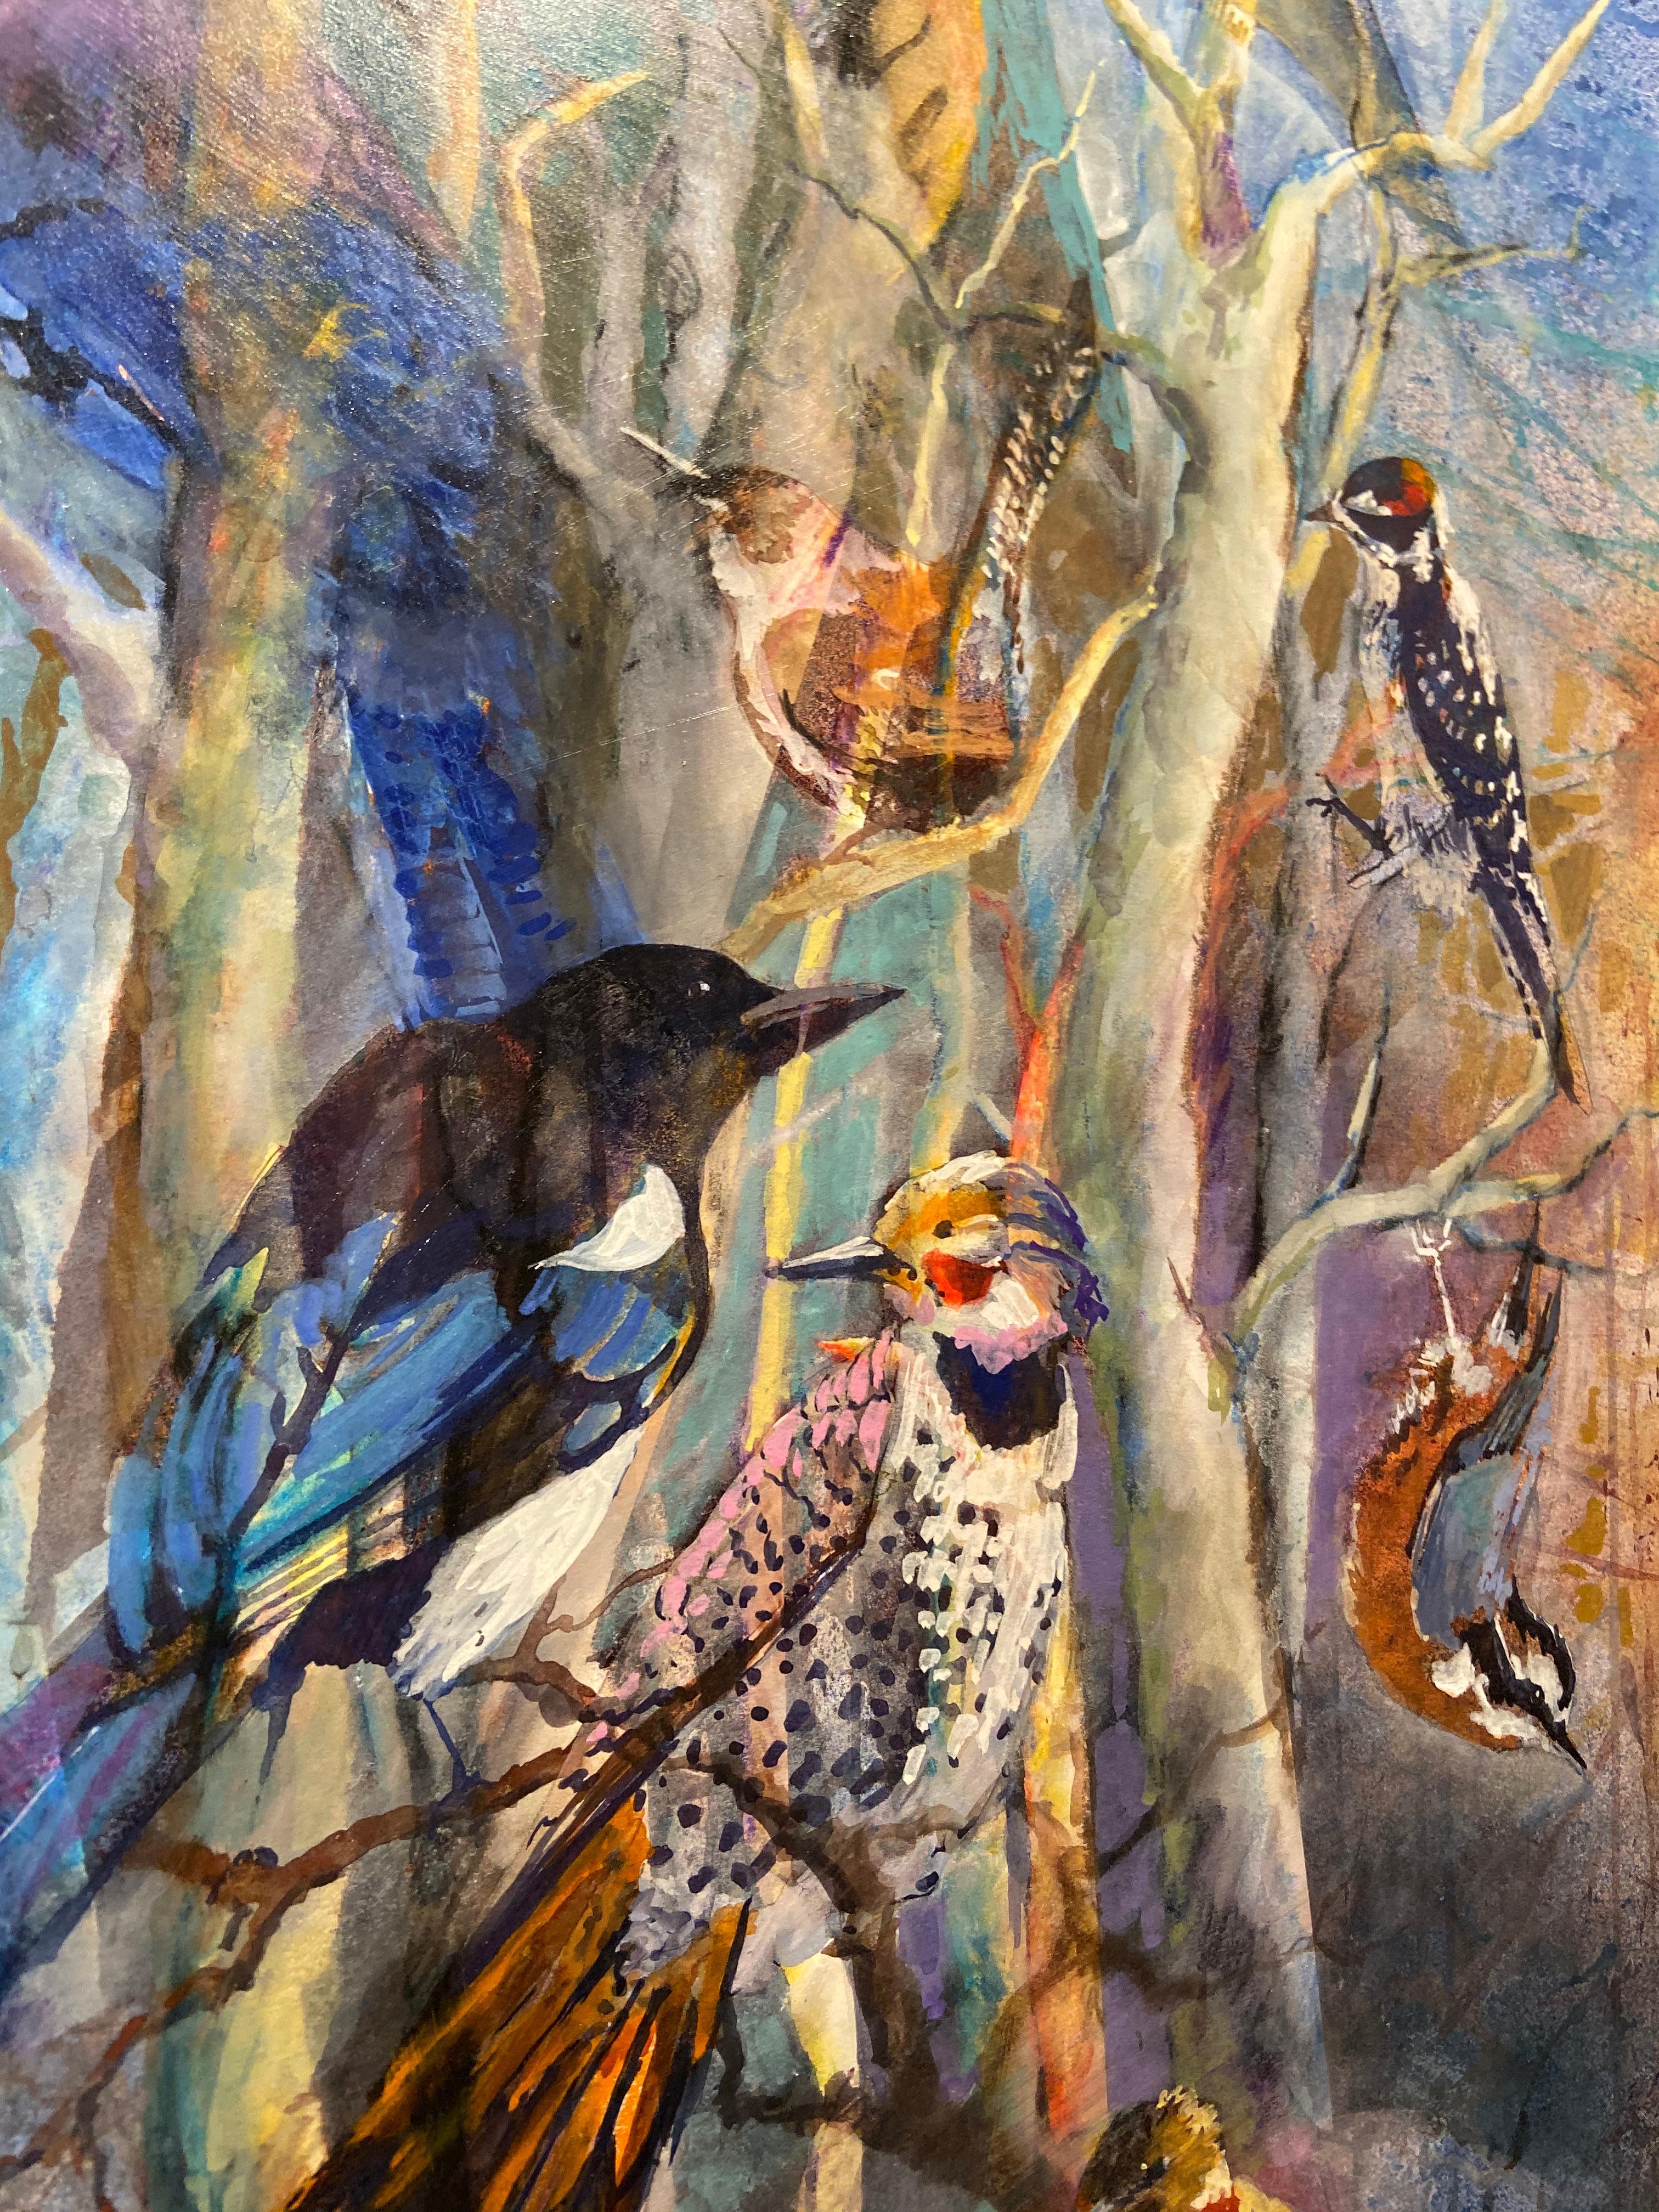 Avian Forest by Cathy Goodale
Watercolor painting of numerous birds, Blue Jay, Woodpeckers, Swallow, Sparrow
30x20